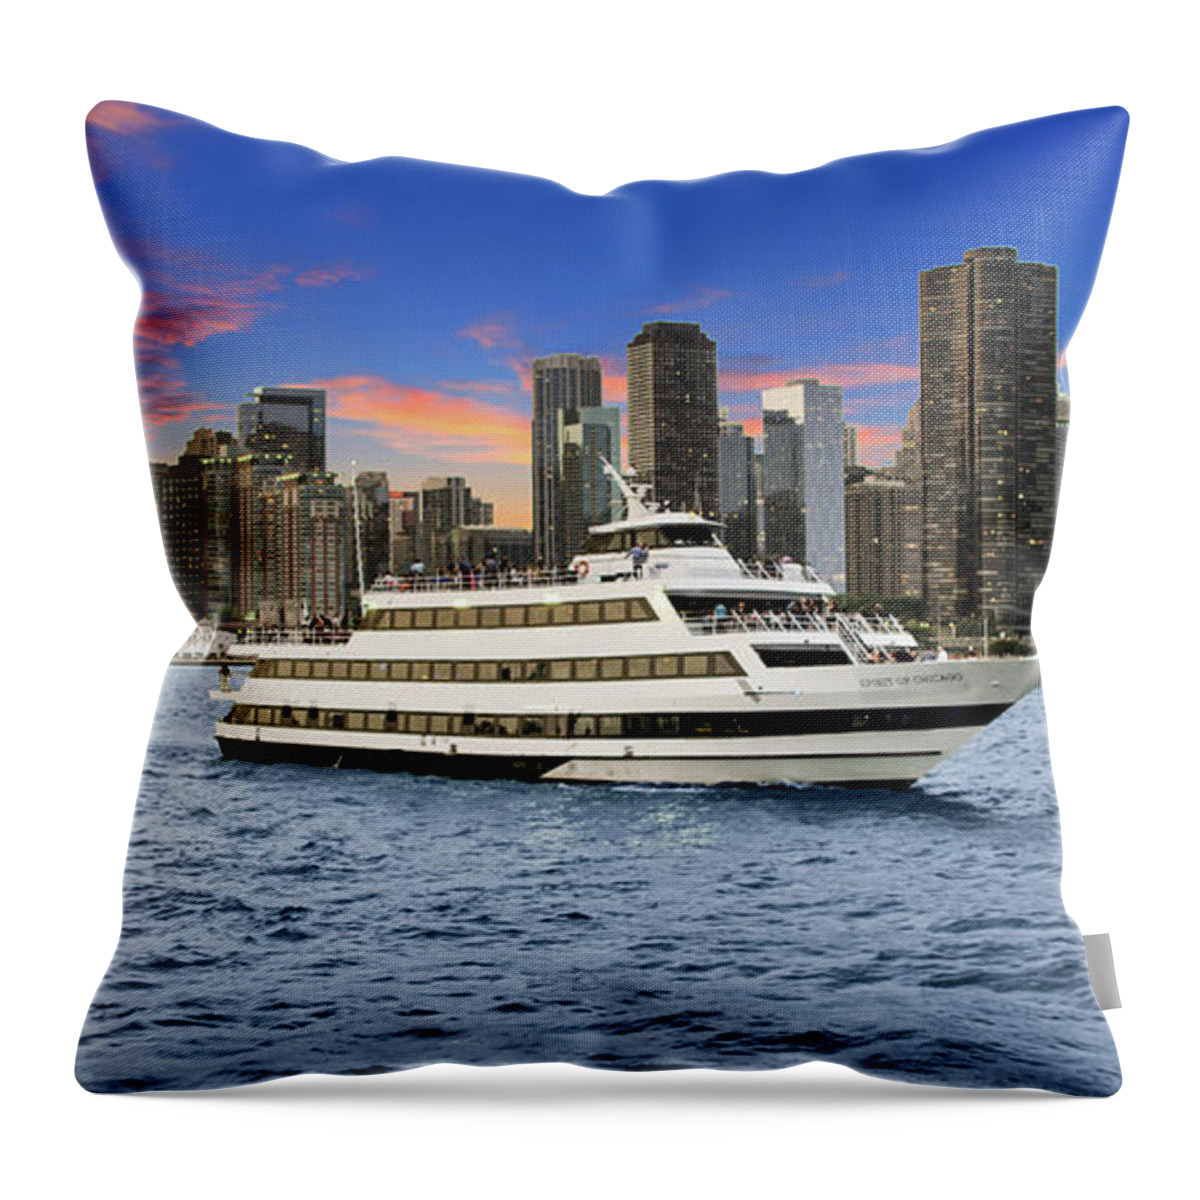 Chicago Throw Pillow featuring the photograph A006_c021_09086m by Lori Strock